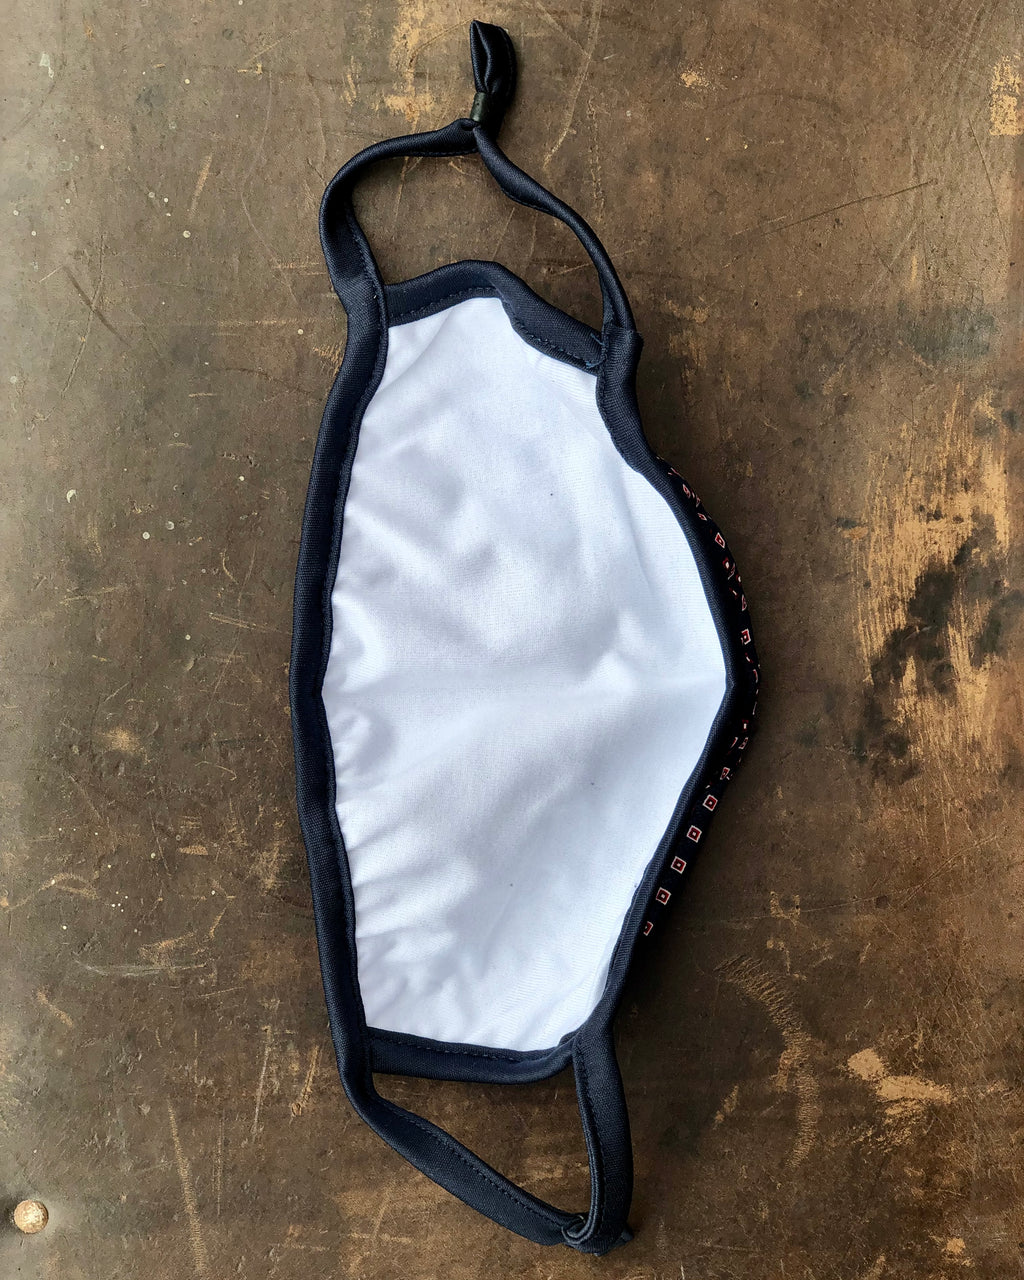 Inner lining of Silandro adjustable cotton face mask